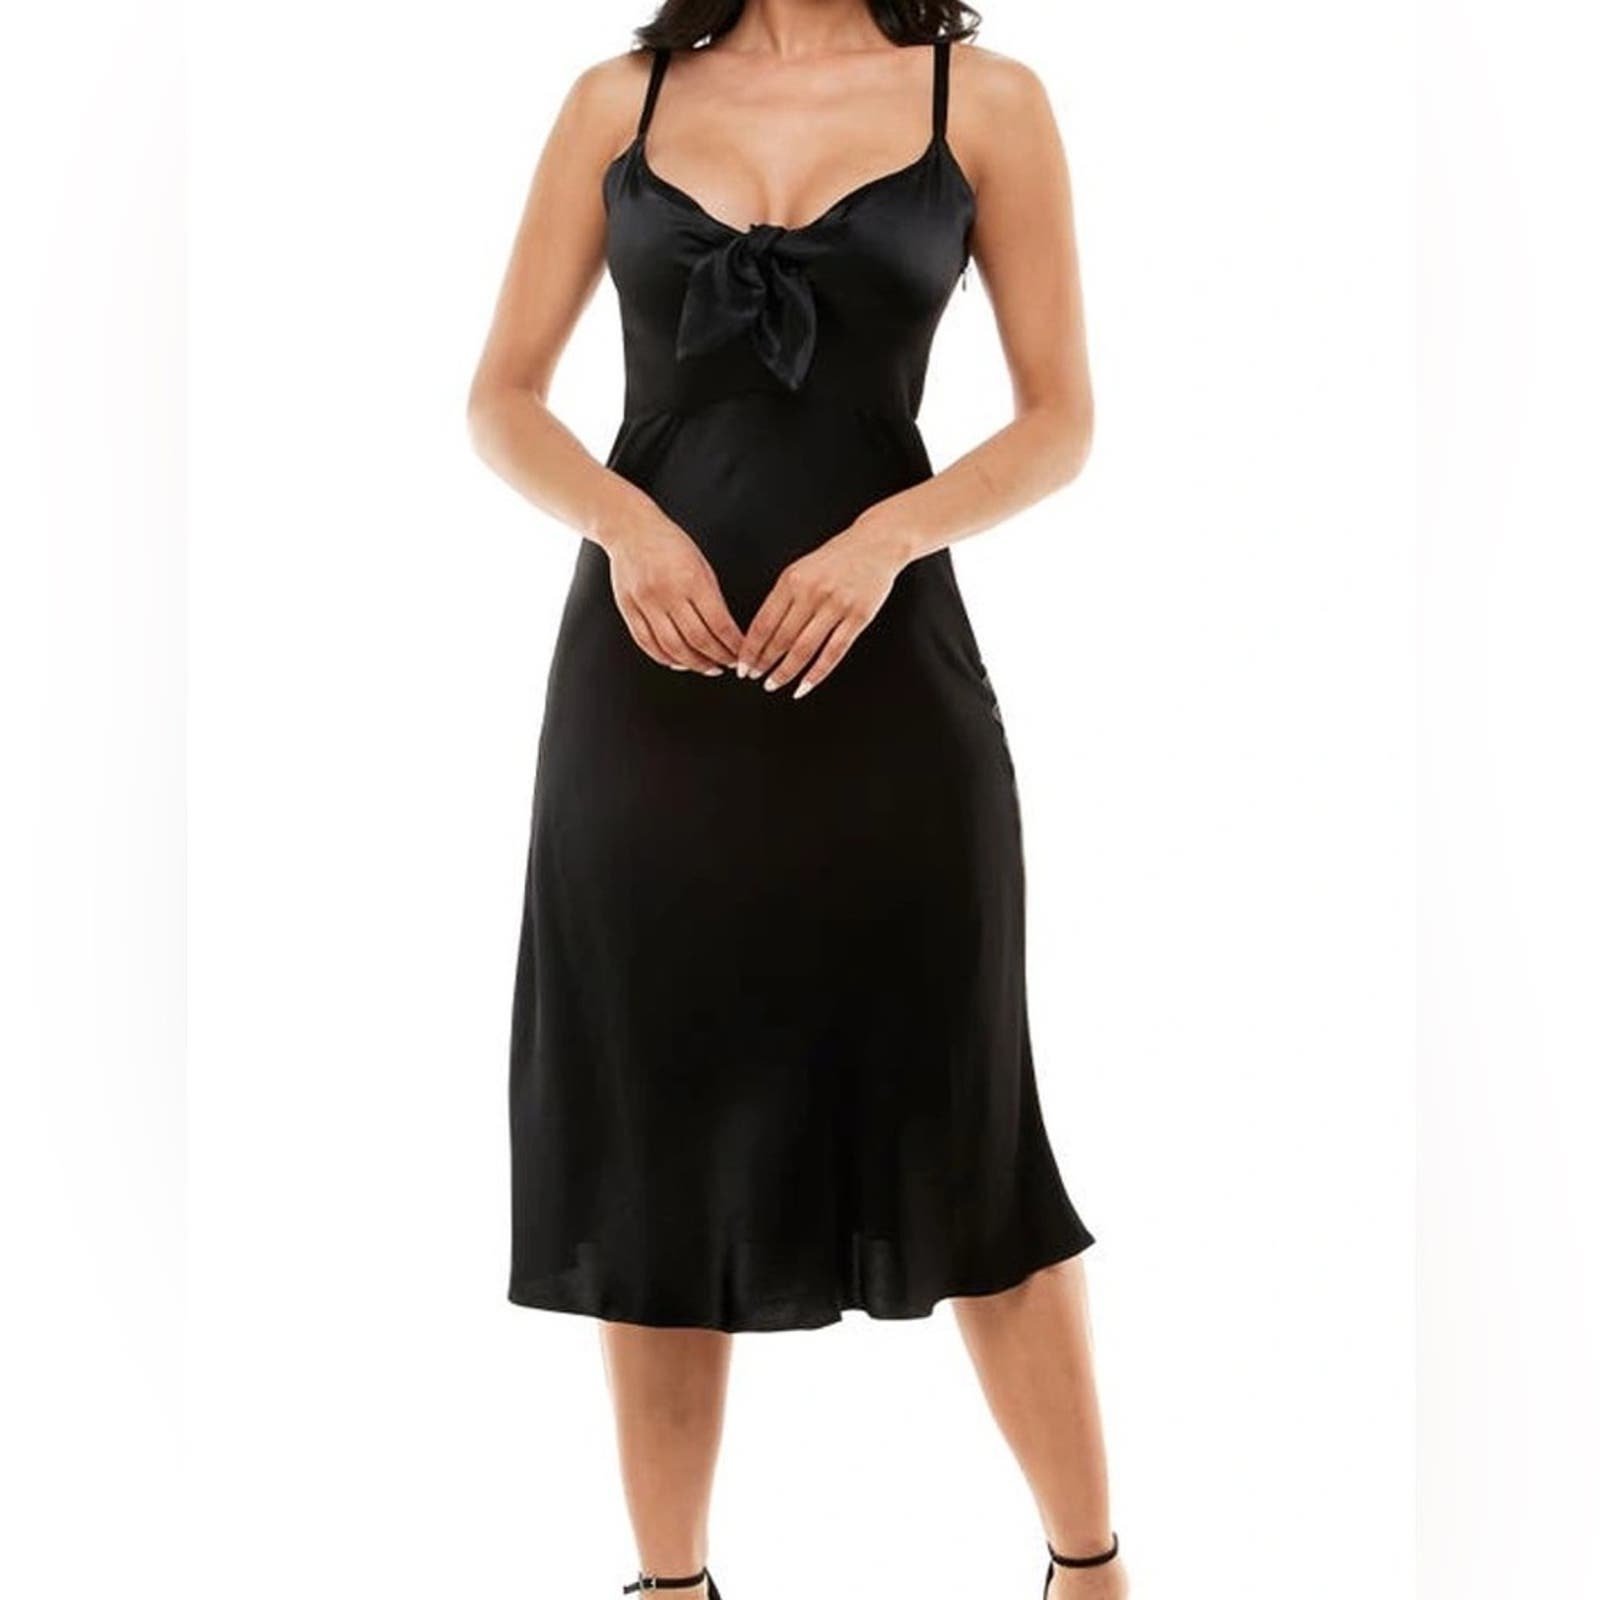 where to buy  Socialite Satin Tie Front Midi Cocktail Dress in Black XS Ic9FkX1NG Hot Sale